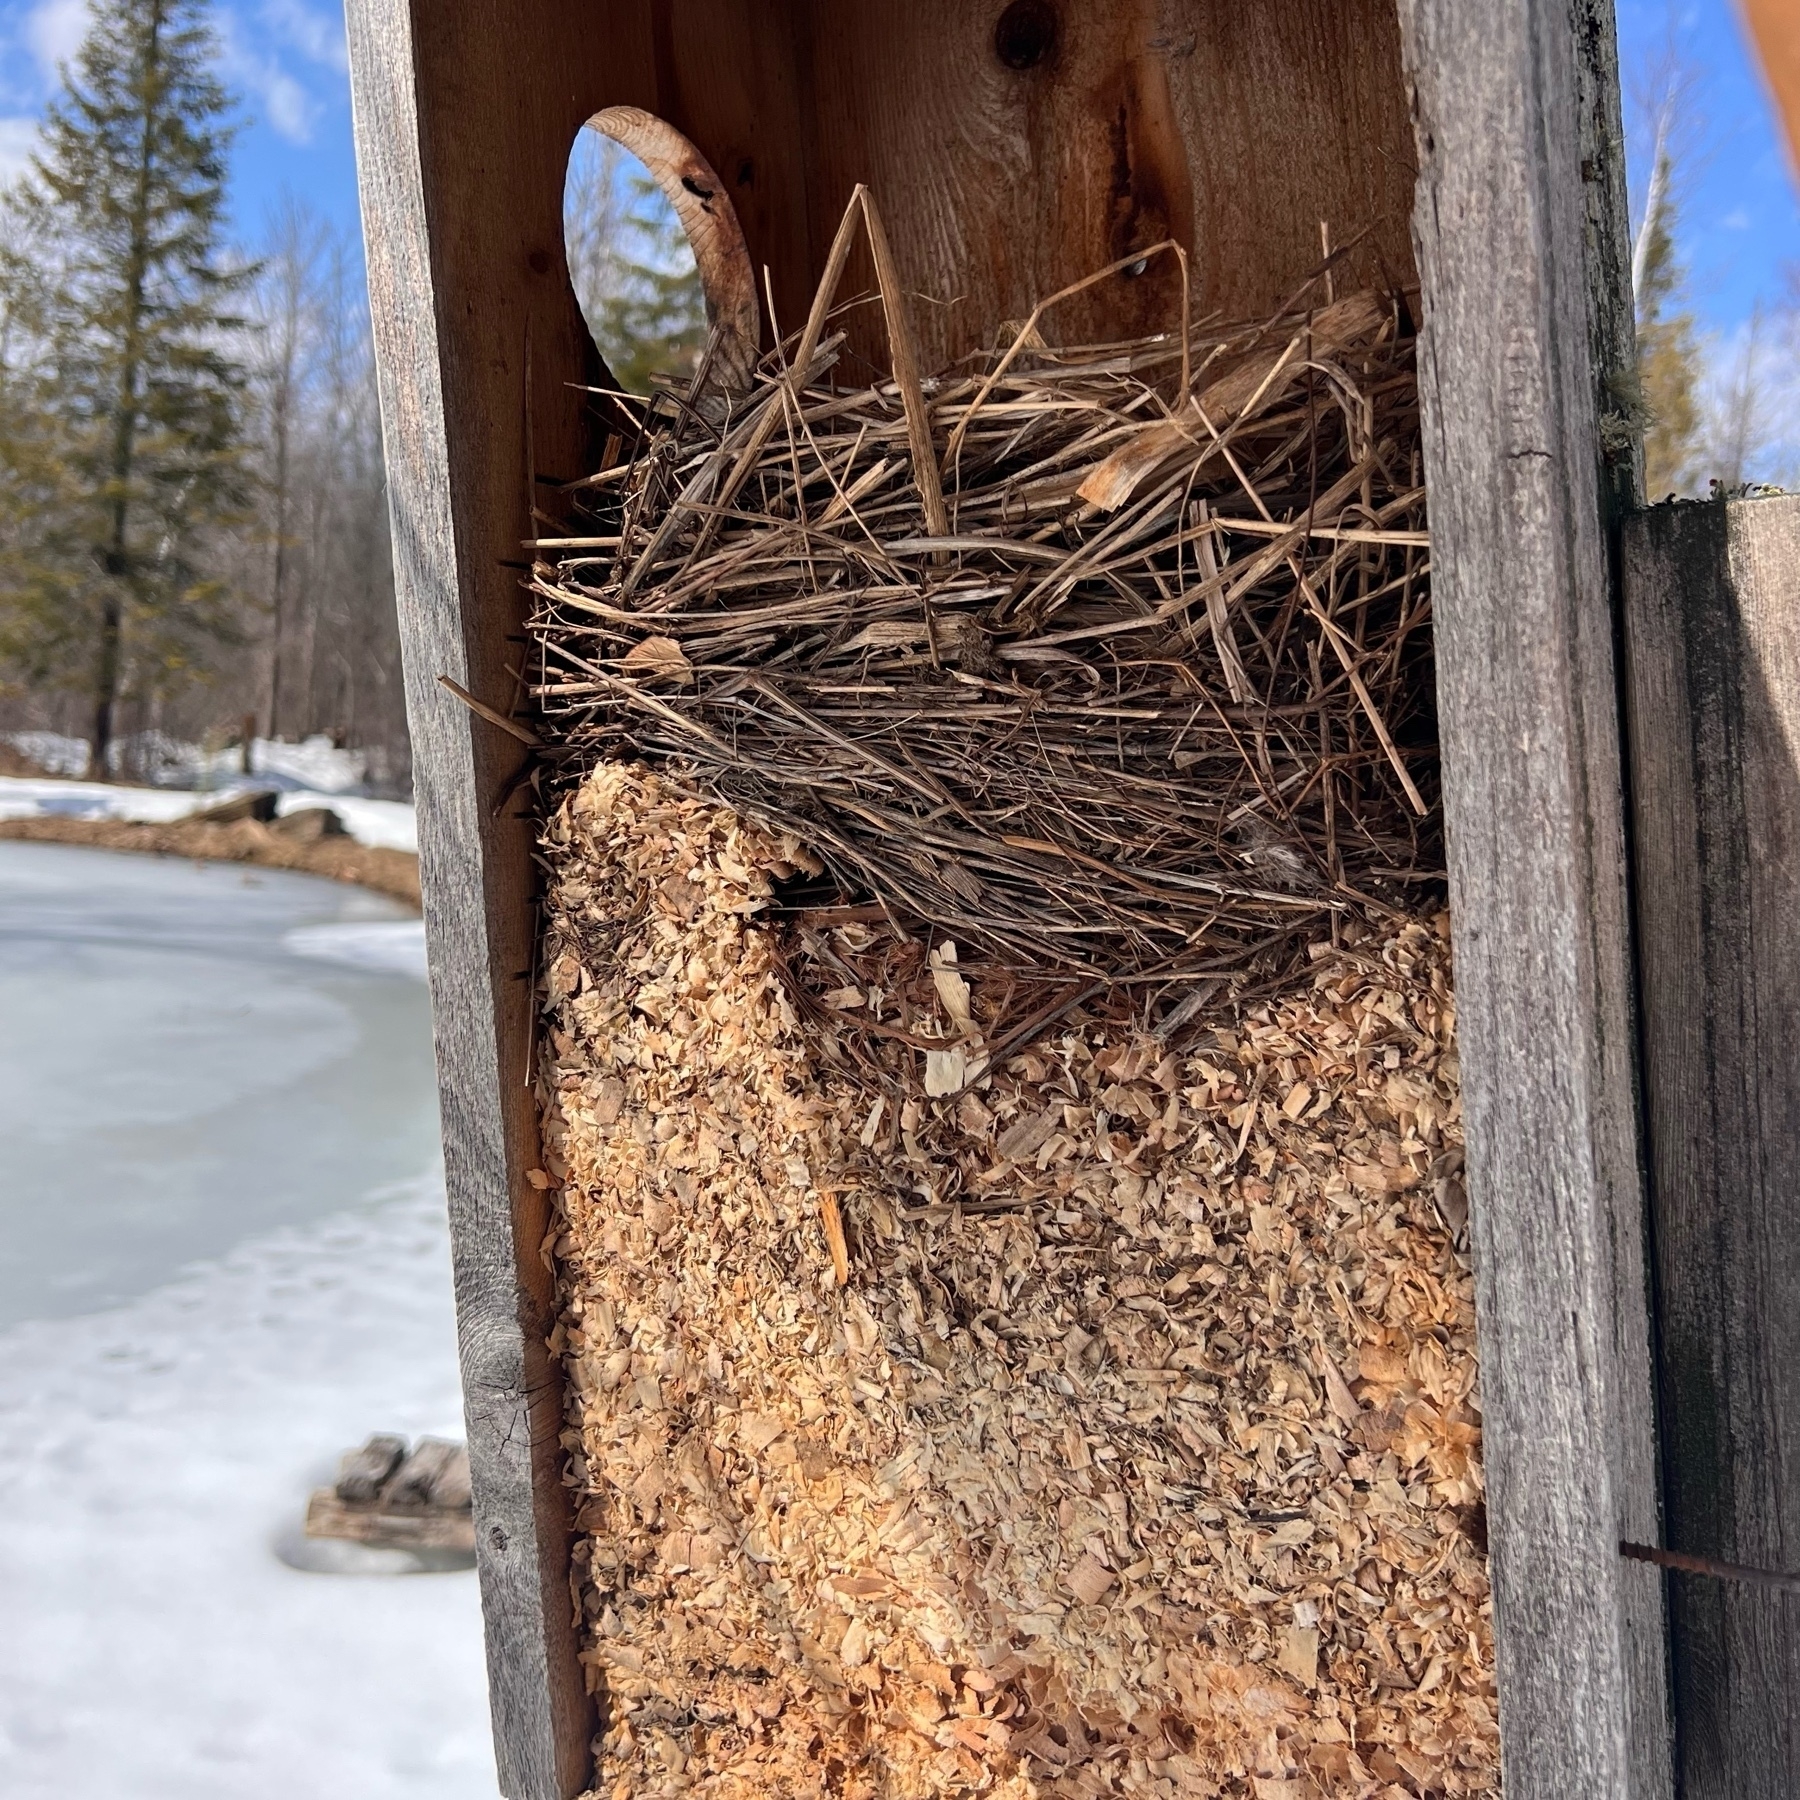 Duck house with the side open showing compressed shavings part way up and a bird nest on top of the pile. Snow and ice on a pond in the background.